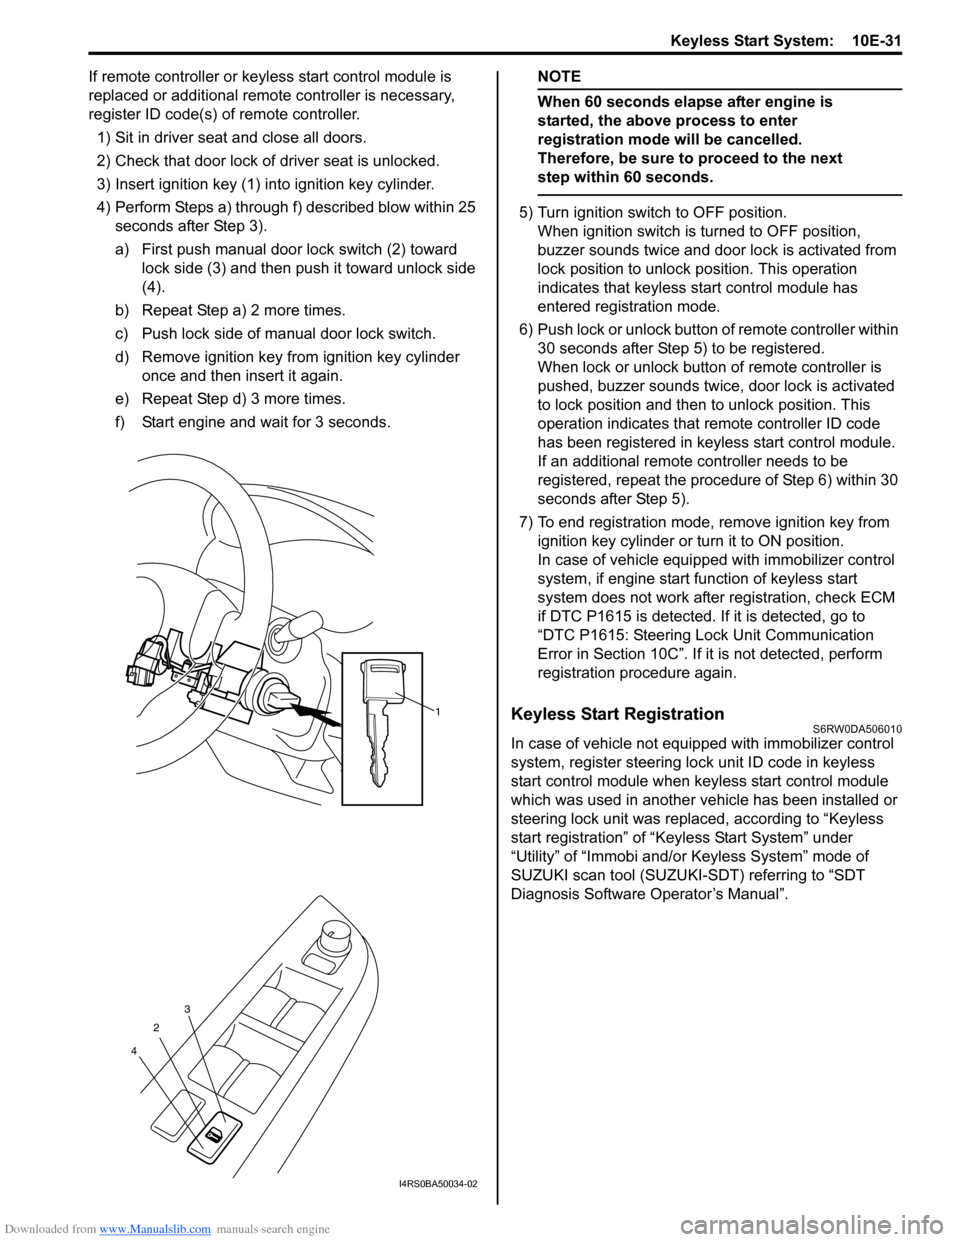 SUZUKI SX4 2006 1.G Service Workshop Manual Downloaded from www.Manualslib.com manuals search engine Keyless Start System:  10E-31
If remote controller or keyless start control module is 
replaced or additional remote controller is necessary, 
